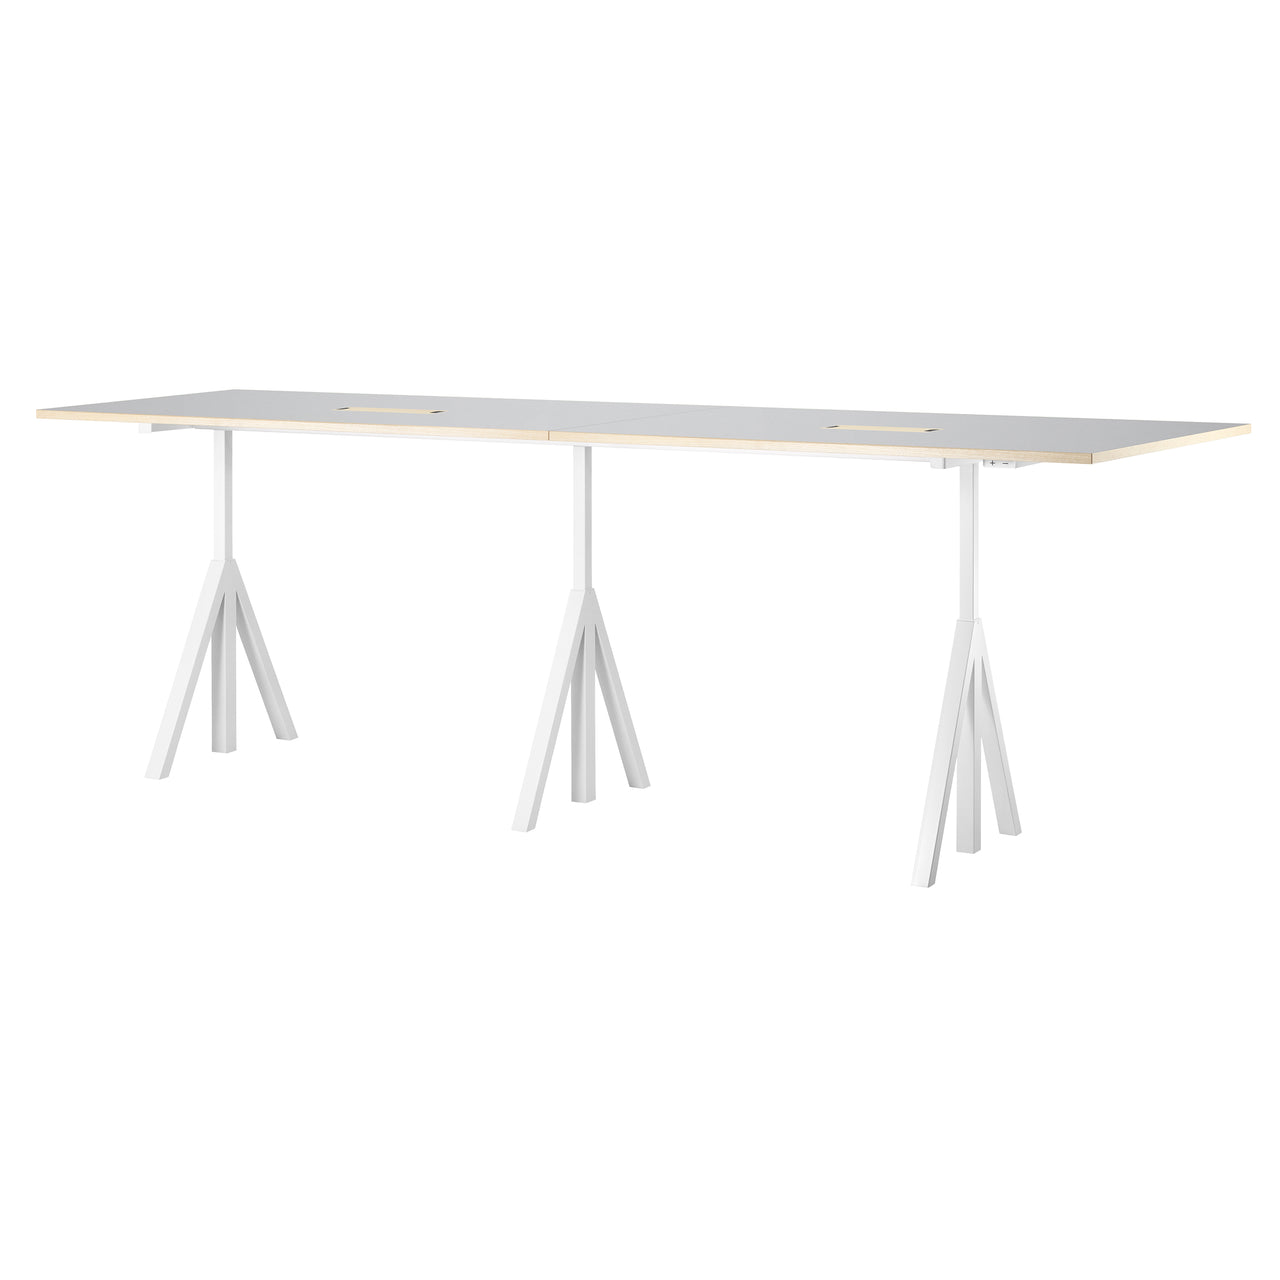 String Works: Height Adjustable Conference Table + Light Grey Linoleum + White